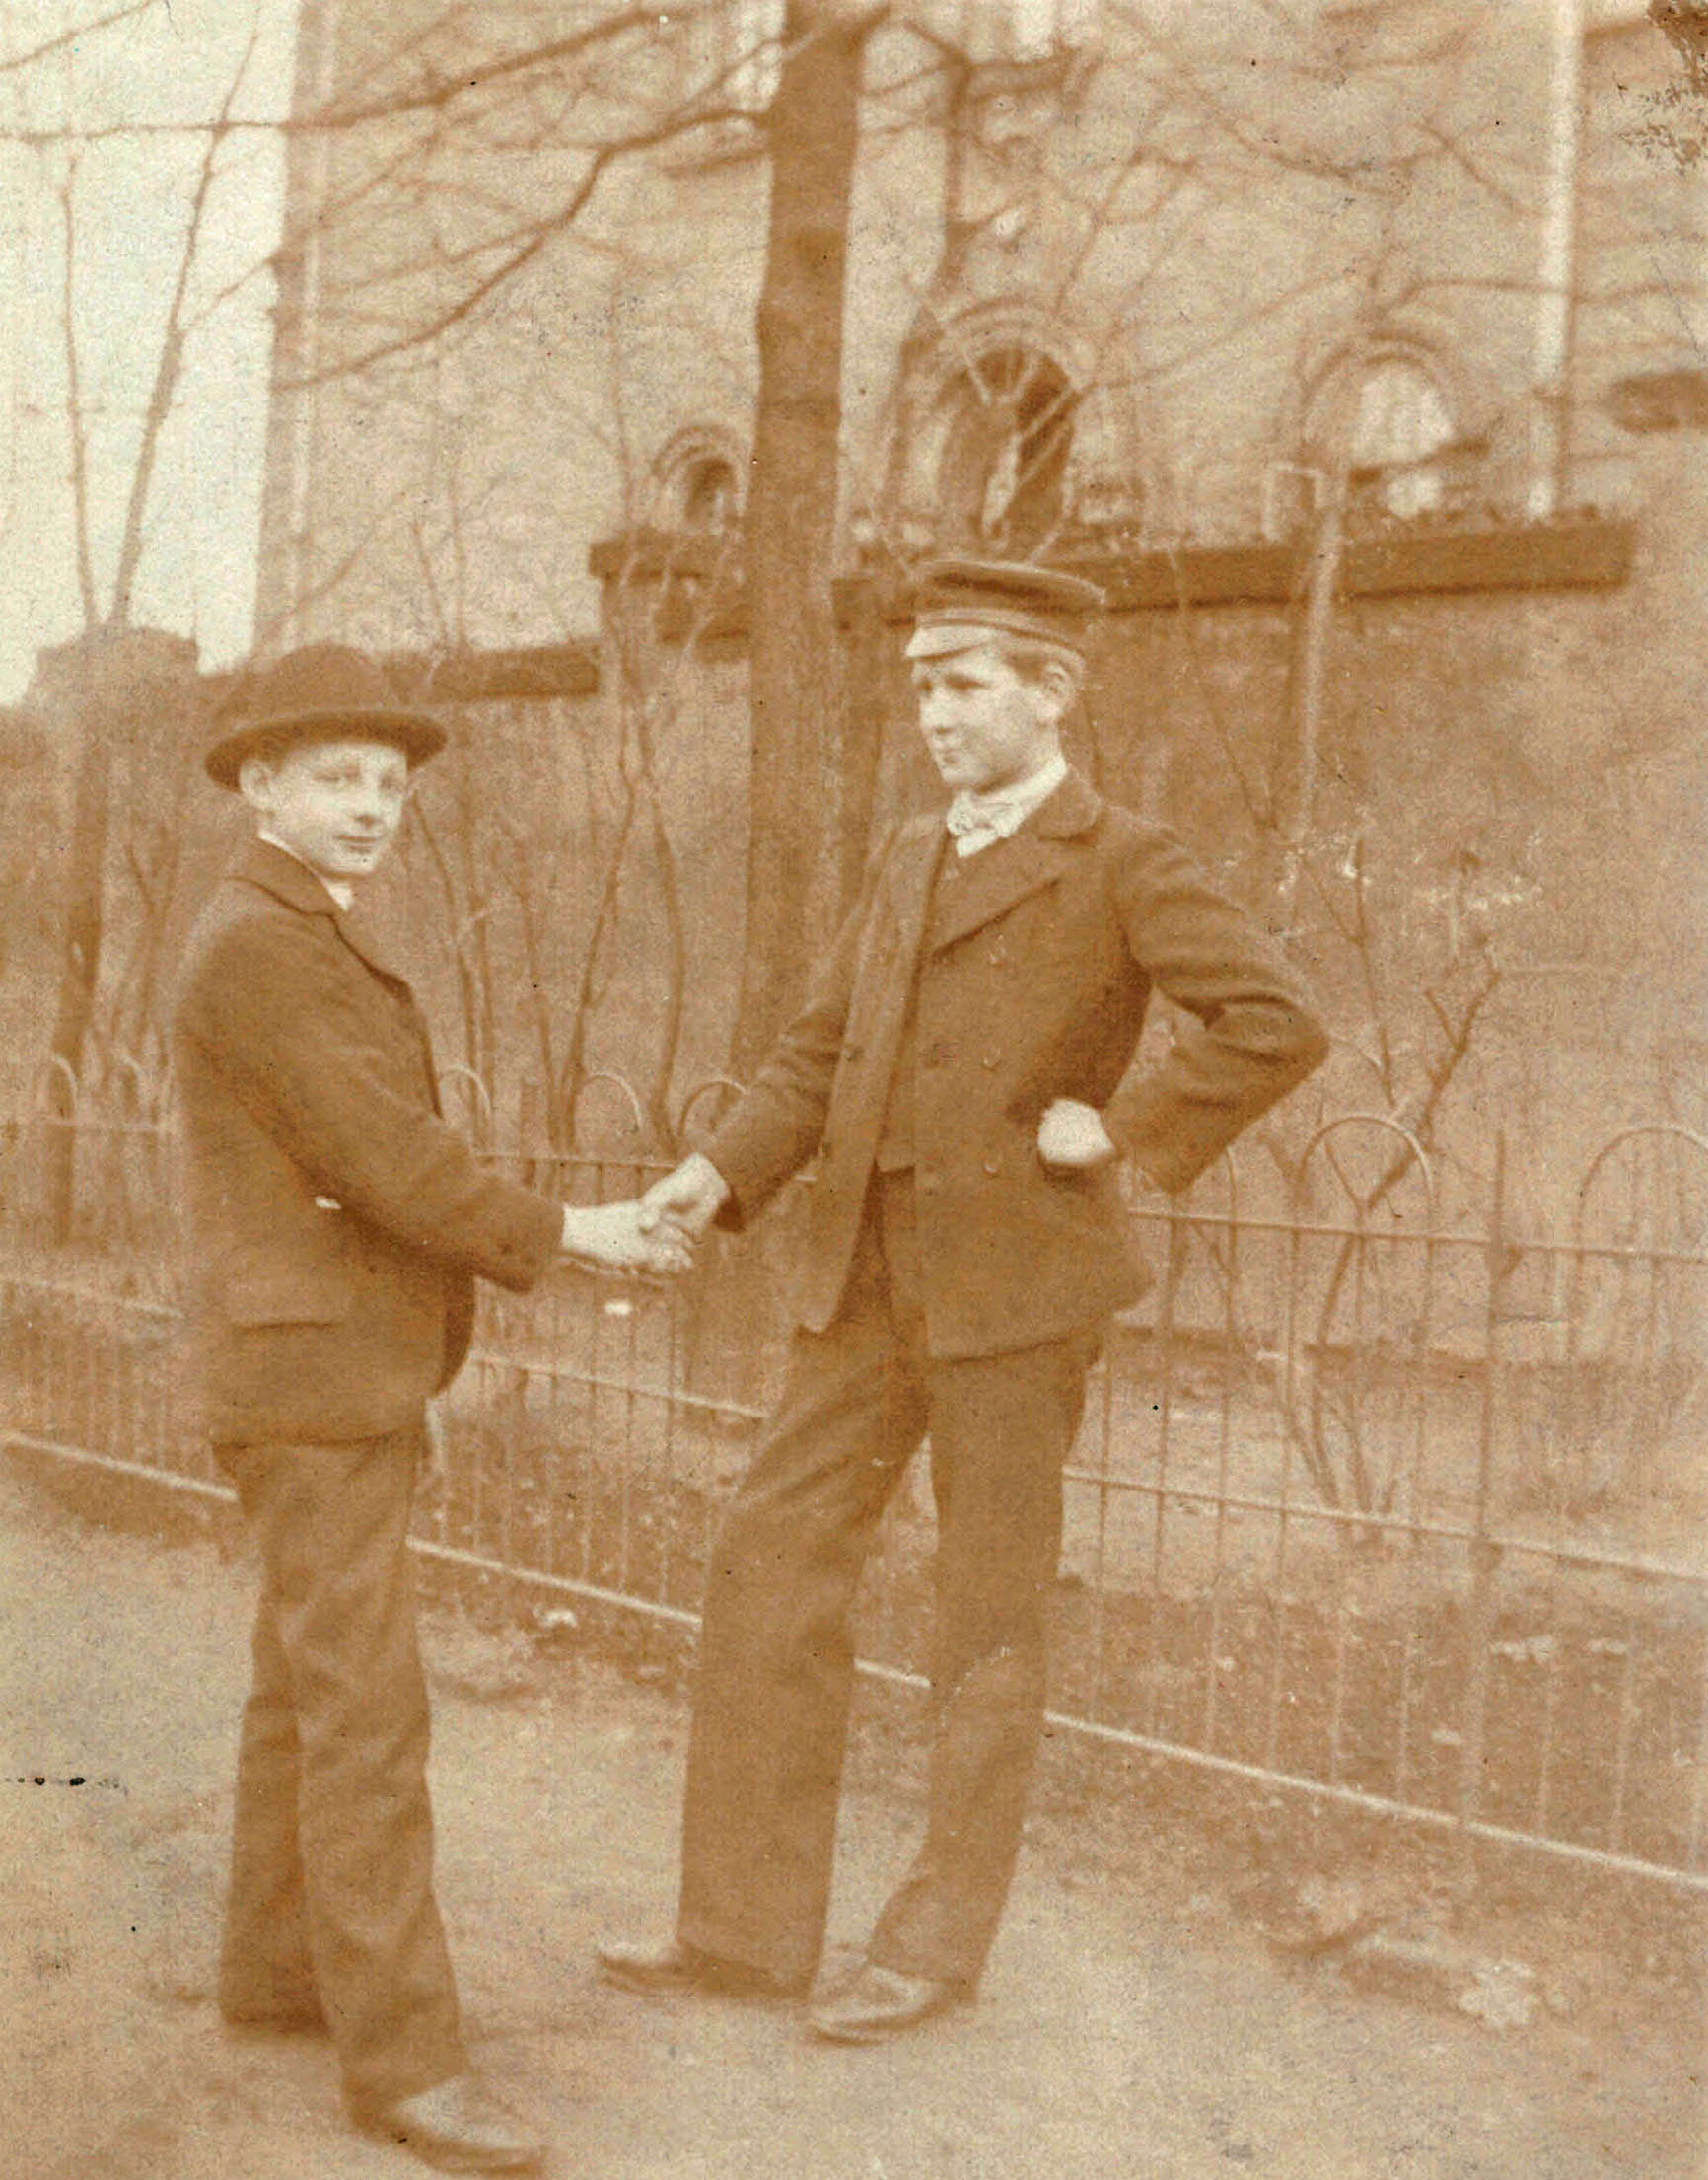 George Dorings and Otto Lindner 1903